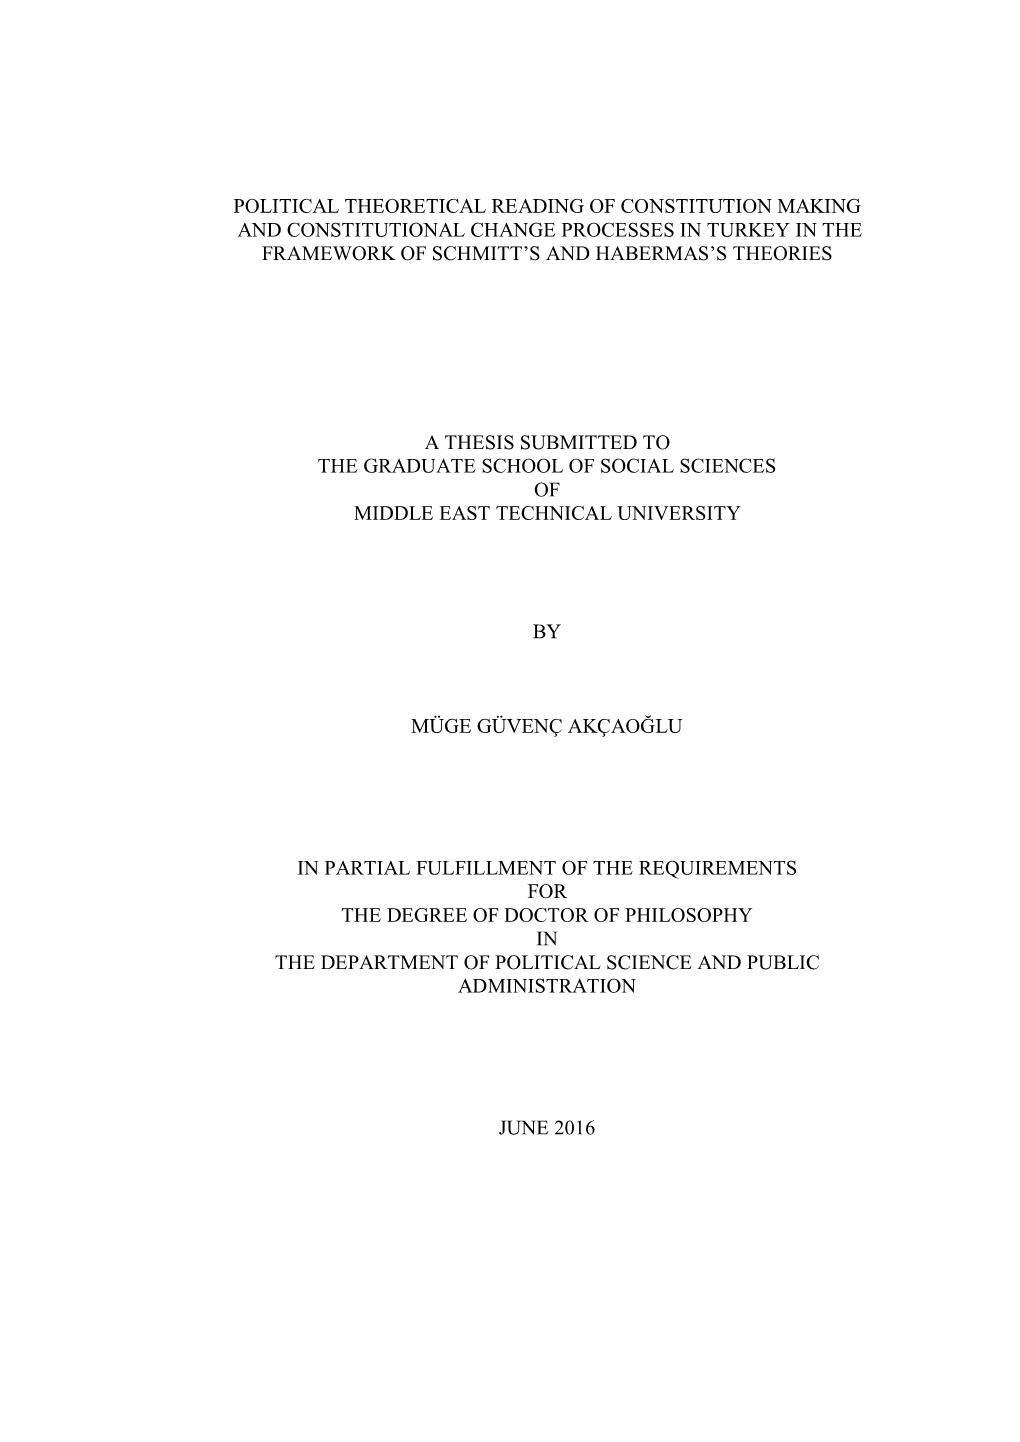 Political Theoretical Reading of Constitution Making and Constitutional Change Processes in Turkey in the Framework of Schmitt’S and Habermas’S Theories